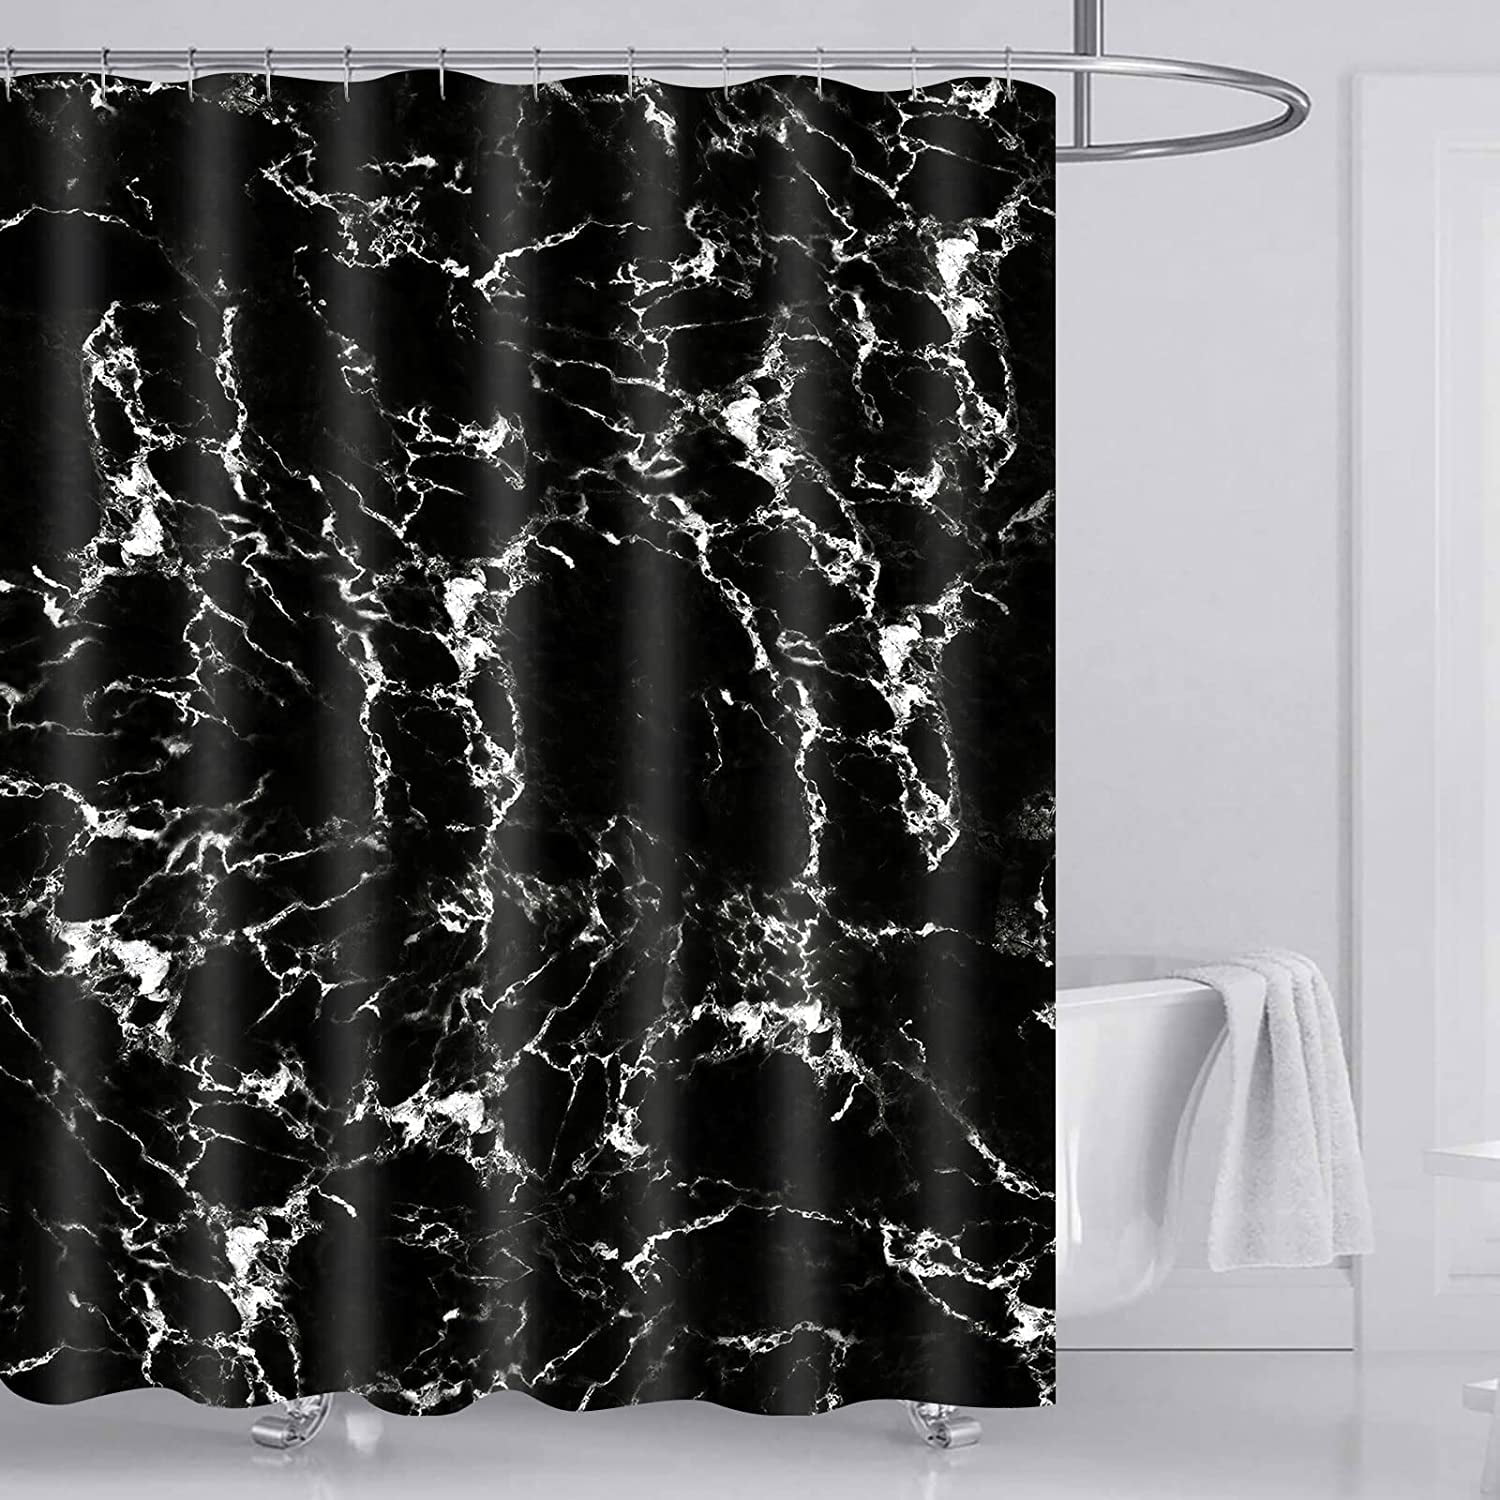 Details about   Nice Black Marble White Veins Abstract Masculine Fabric Shower Curtain 